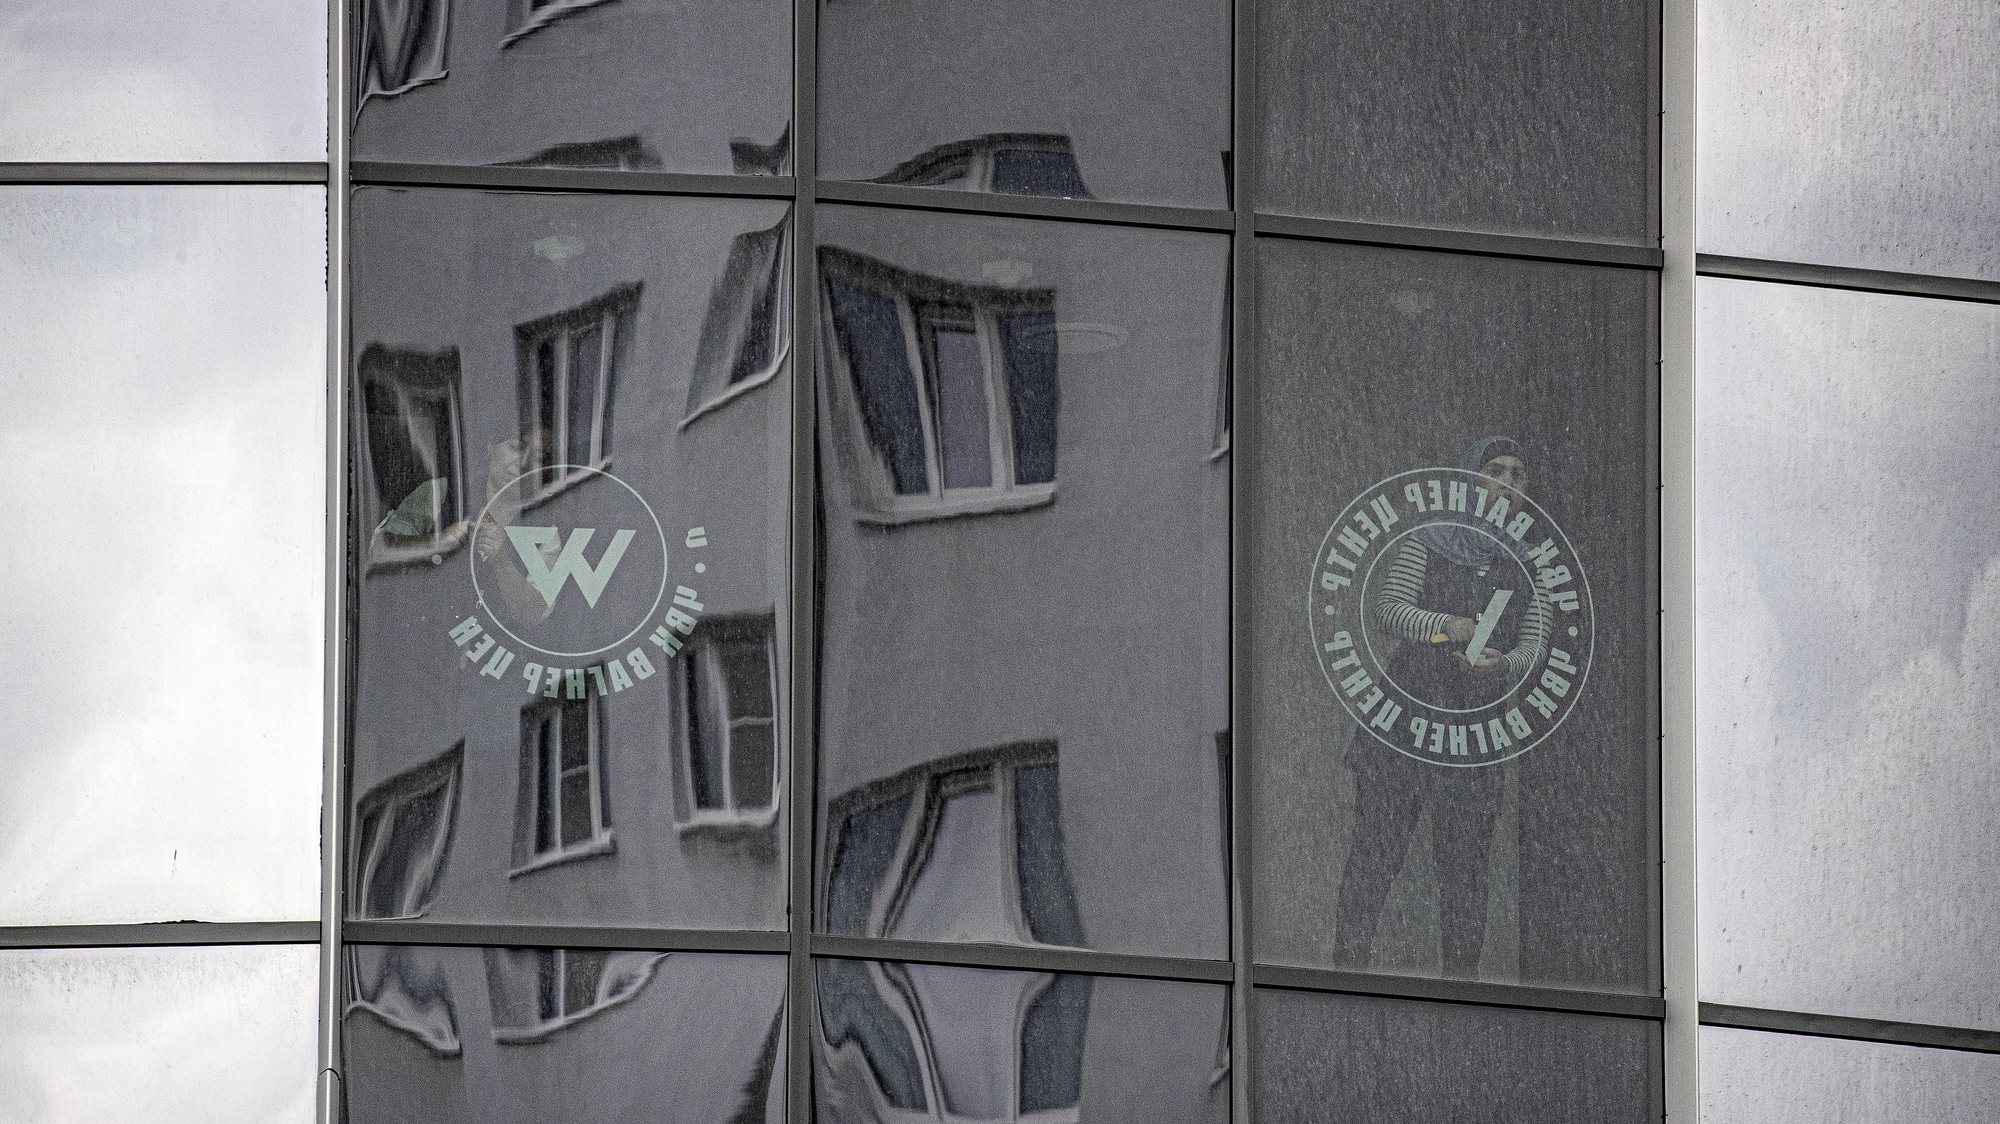 epa10722702 Workers remove the logo of the private military company (PMC) Wagner Group from the windows of the Sea Capital (Morskaya Stolitsa) business center, where Yevgeny Prigozhin&#039;s company rented several floors in St. Petersburg, Russia, 02 July 2023. On 23 June 2023, Wagner Group forces led by Prigozhin left the frontline in Ukraine and staged an &#039;armed mutiny&#039; against Russia&#039;s military leadership. Prigozhin claimed on 24 June 2023 that his troops had occupied the headquarters of the Southern Military District in Rostov-on-Don, Russia, a key city near the Ukrainian border. A deal negotiated by the Belarusian president with Prigozhin stopped the Wagner forces&#039; movement toward Moscow and ended the standoff, with Prigozhin and his fighters leaving the country.  EPA/ANATOLY MALTSEV